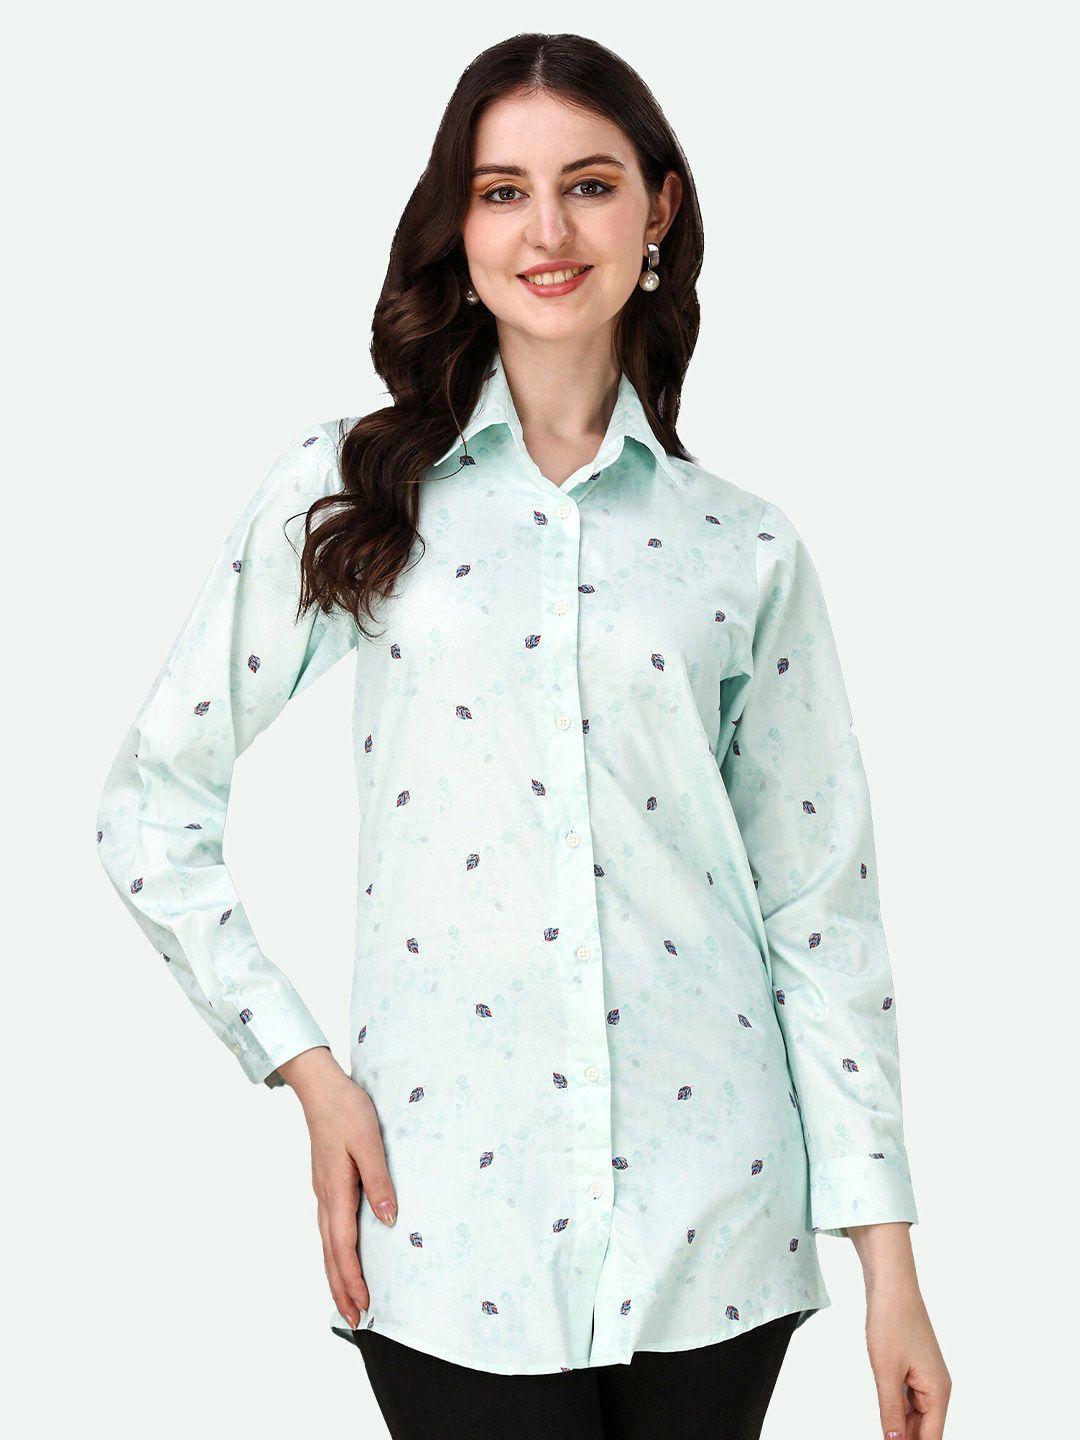 french crown standard opaque conversational printed cotton casual shirt